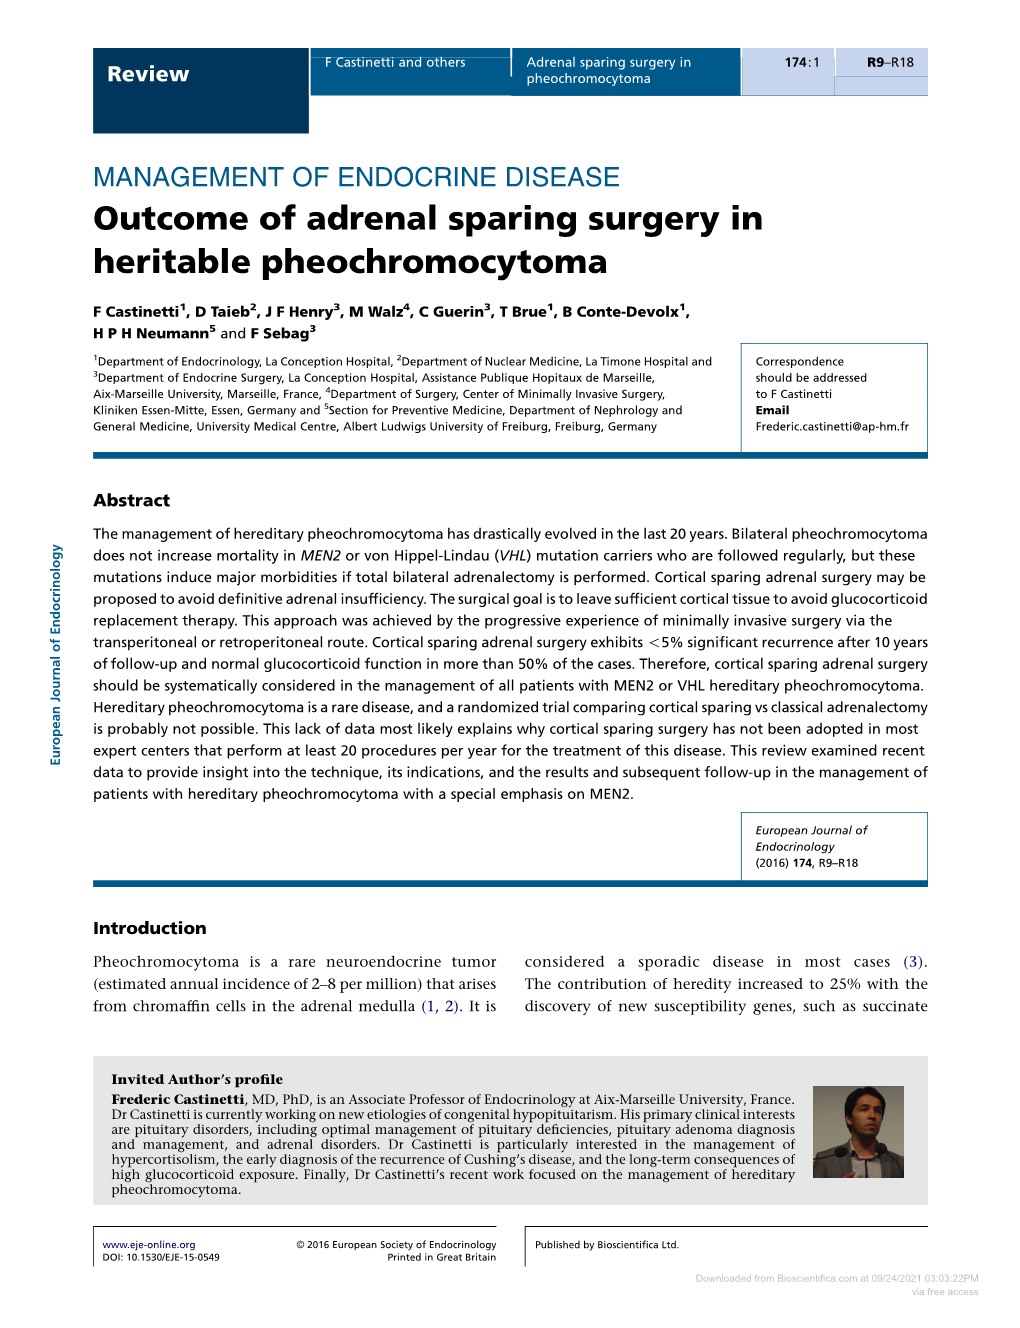 Outcome of Adrenal Sparing Surgery in Heritable Pheochromocytoma